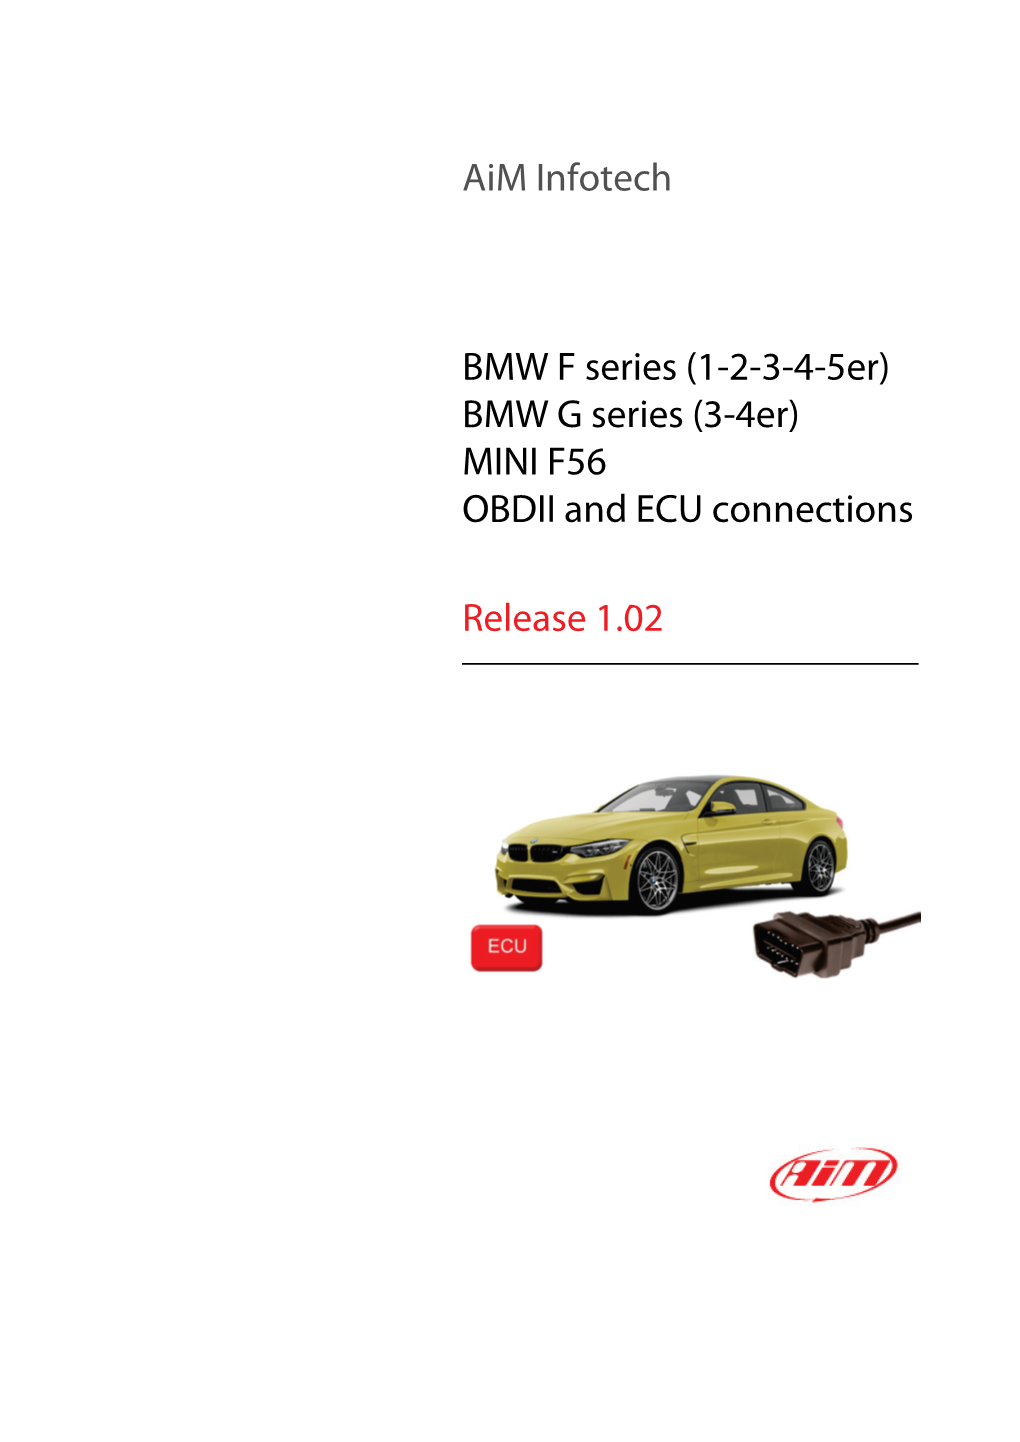 BMW G Series (3-4Er) MINI F56 OBDII and ECU Connections Release 1.02